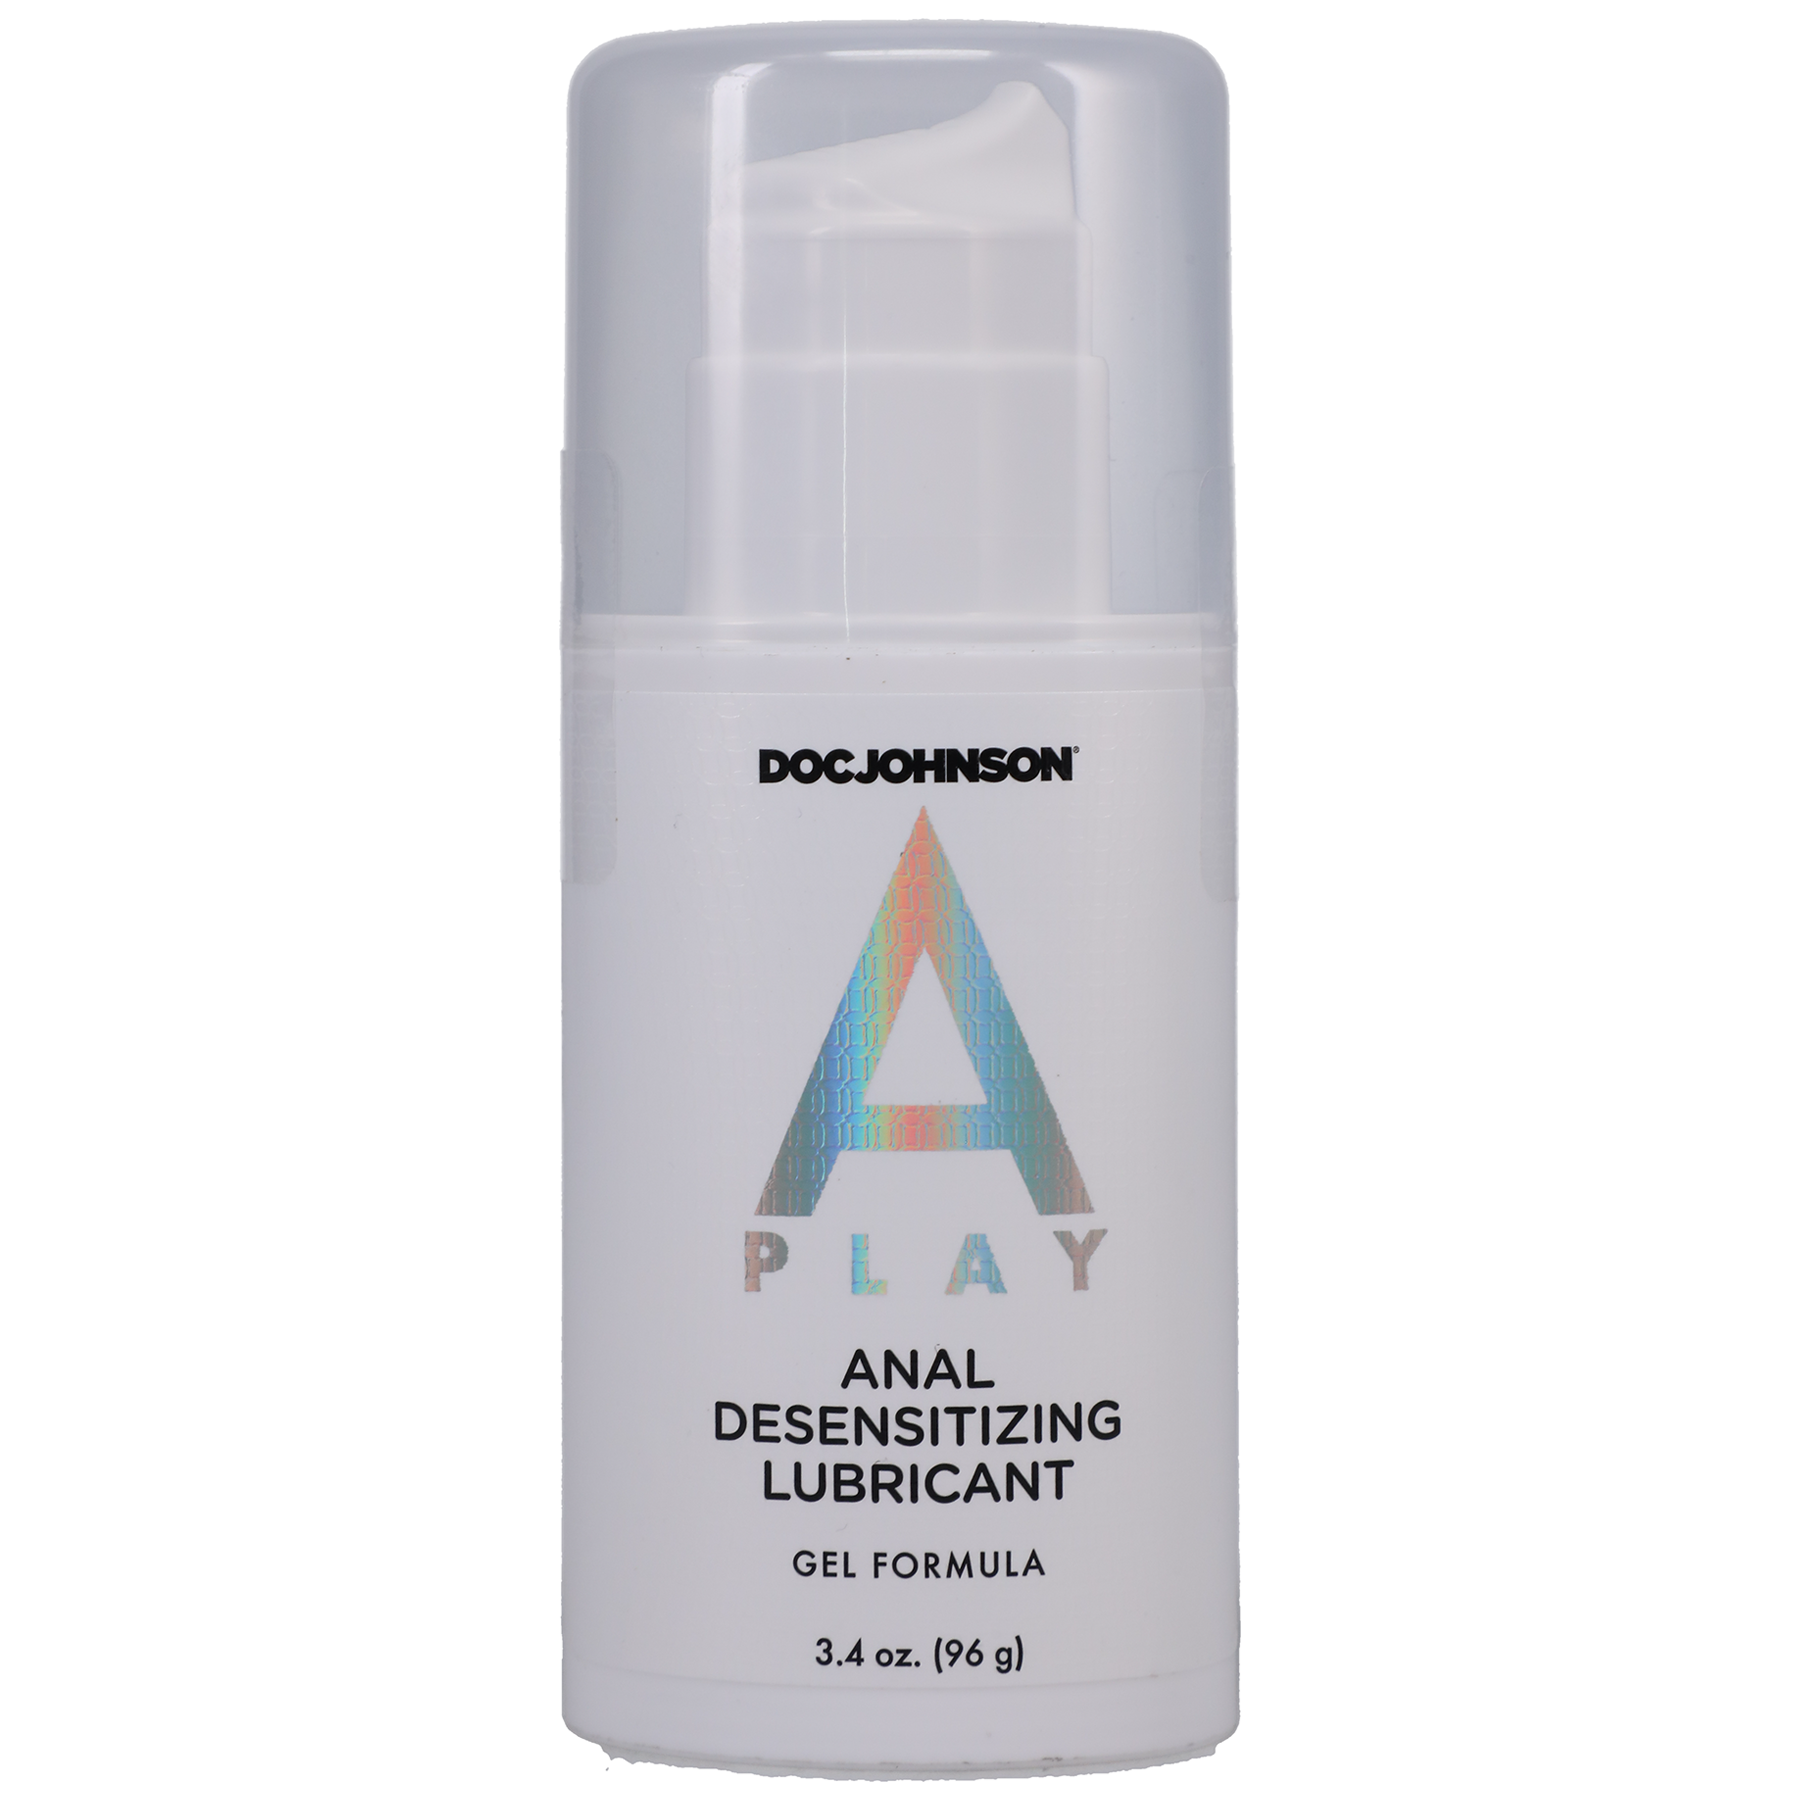 Doc Johnson A Play Anal Desensitizing Lubricant Lube Long Lasting Anal